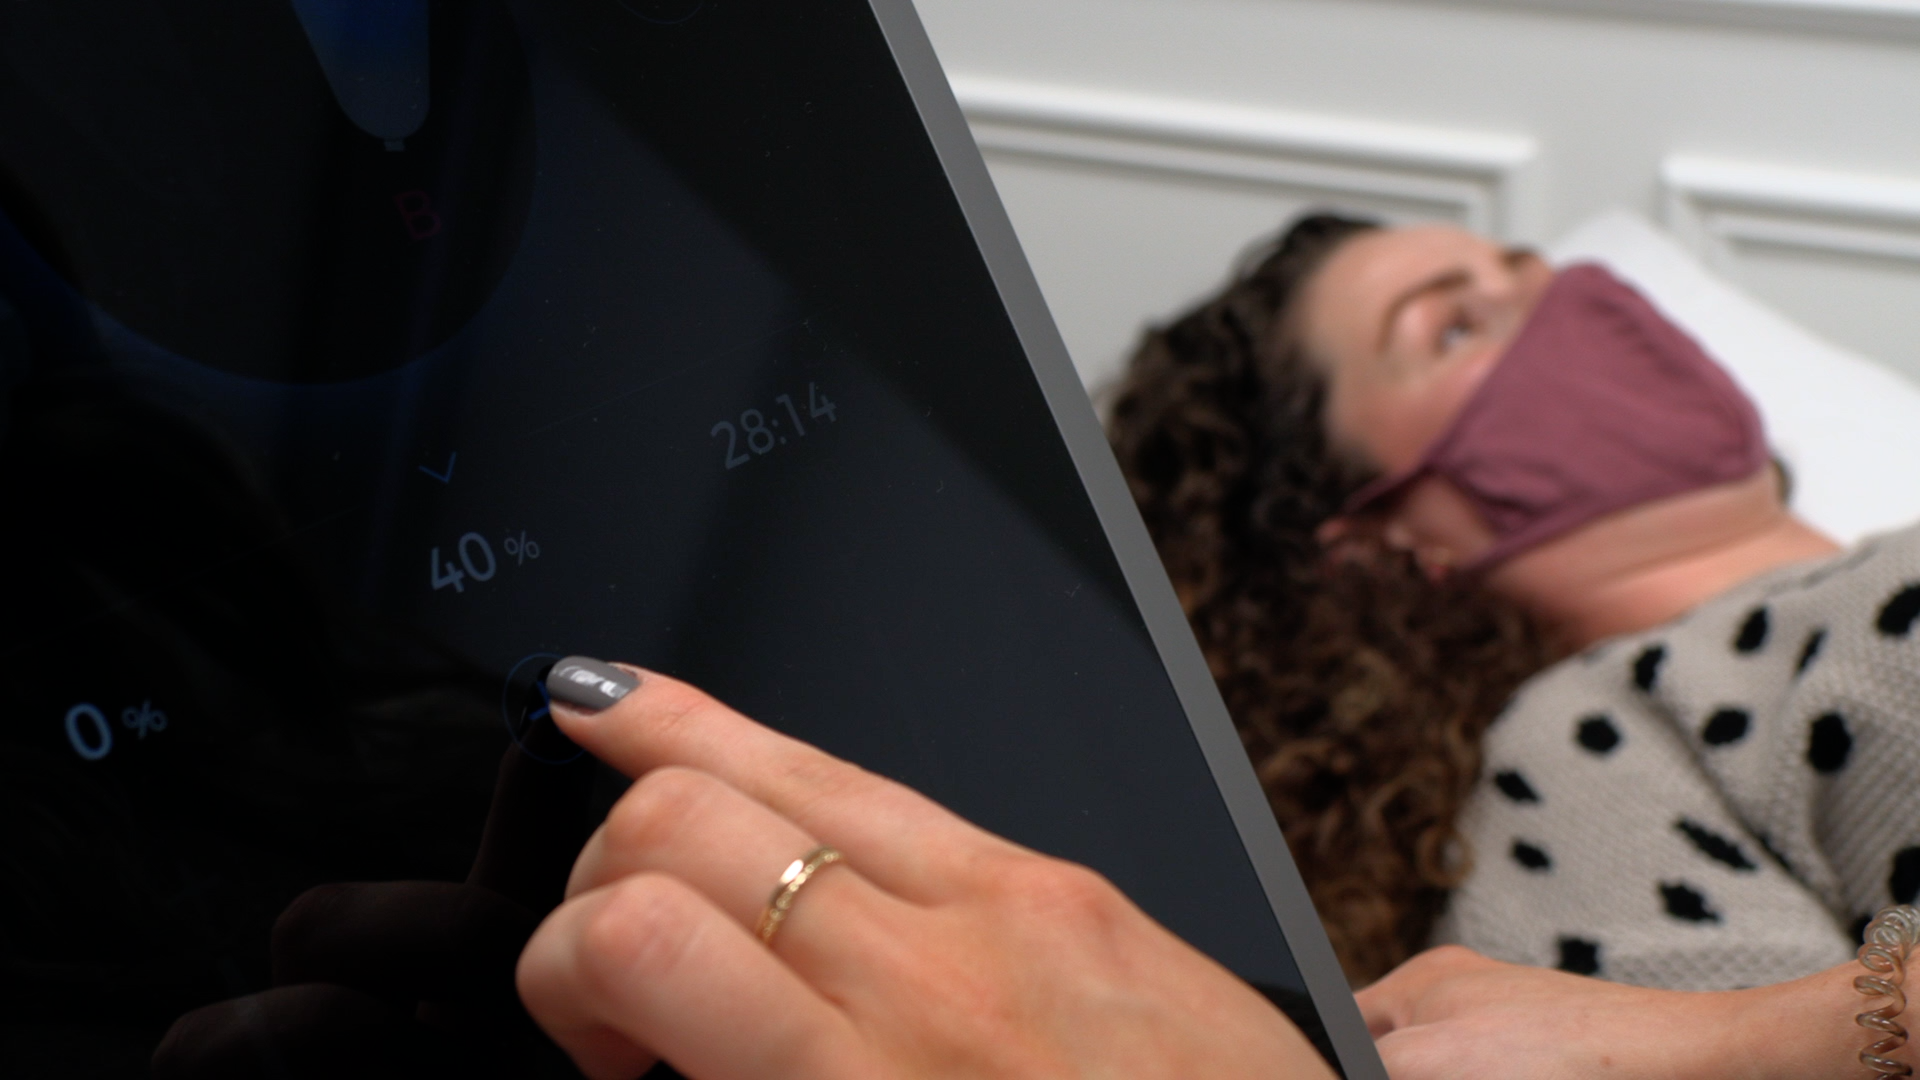 Close image of Emsculpt controls with woman in the background - Corelife Wellness Better Core Fitness